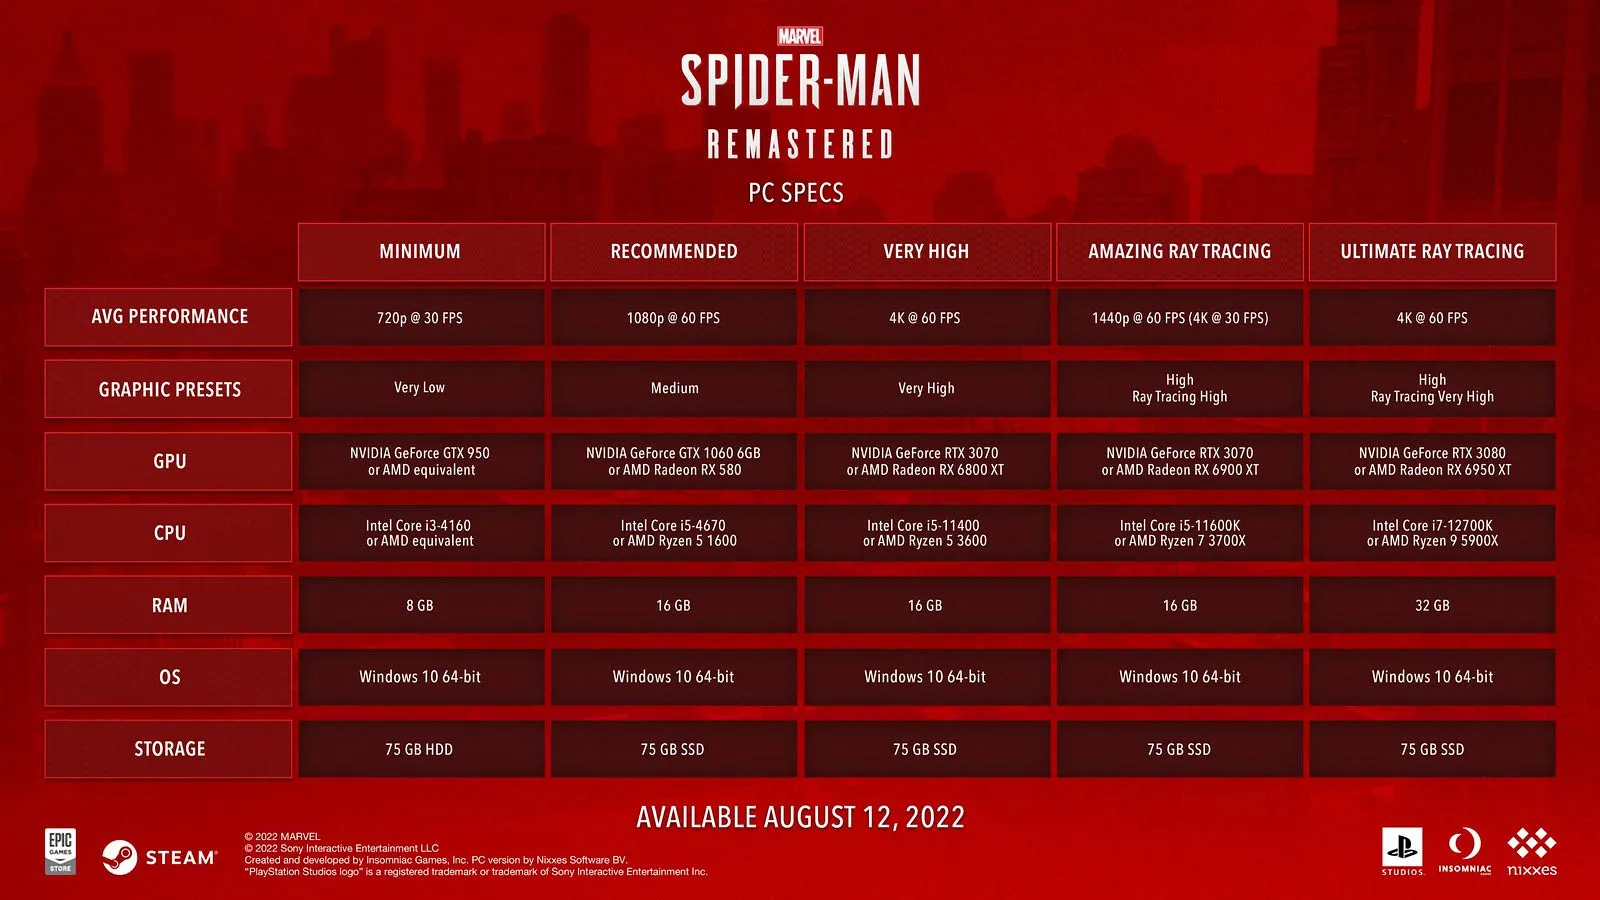 Marvel's Spider-Man Remastered PC specs and release date revealed